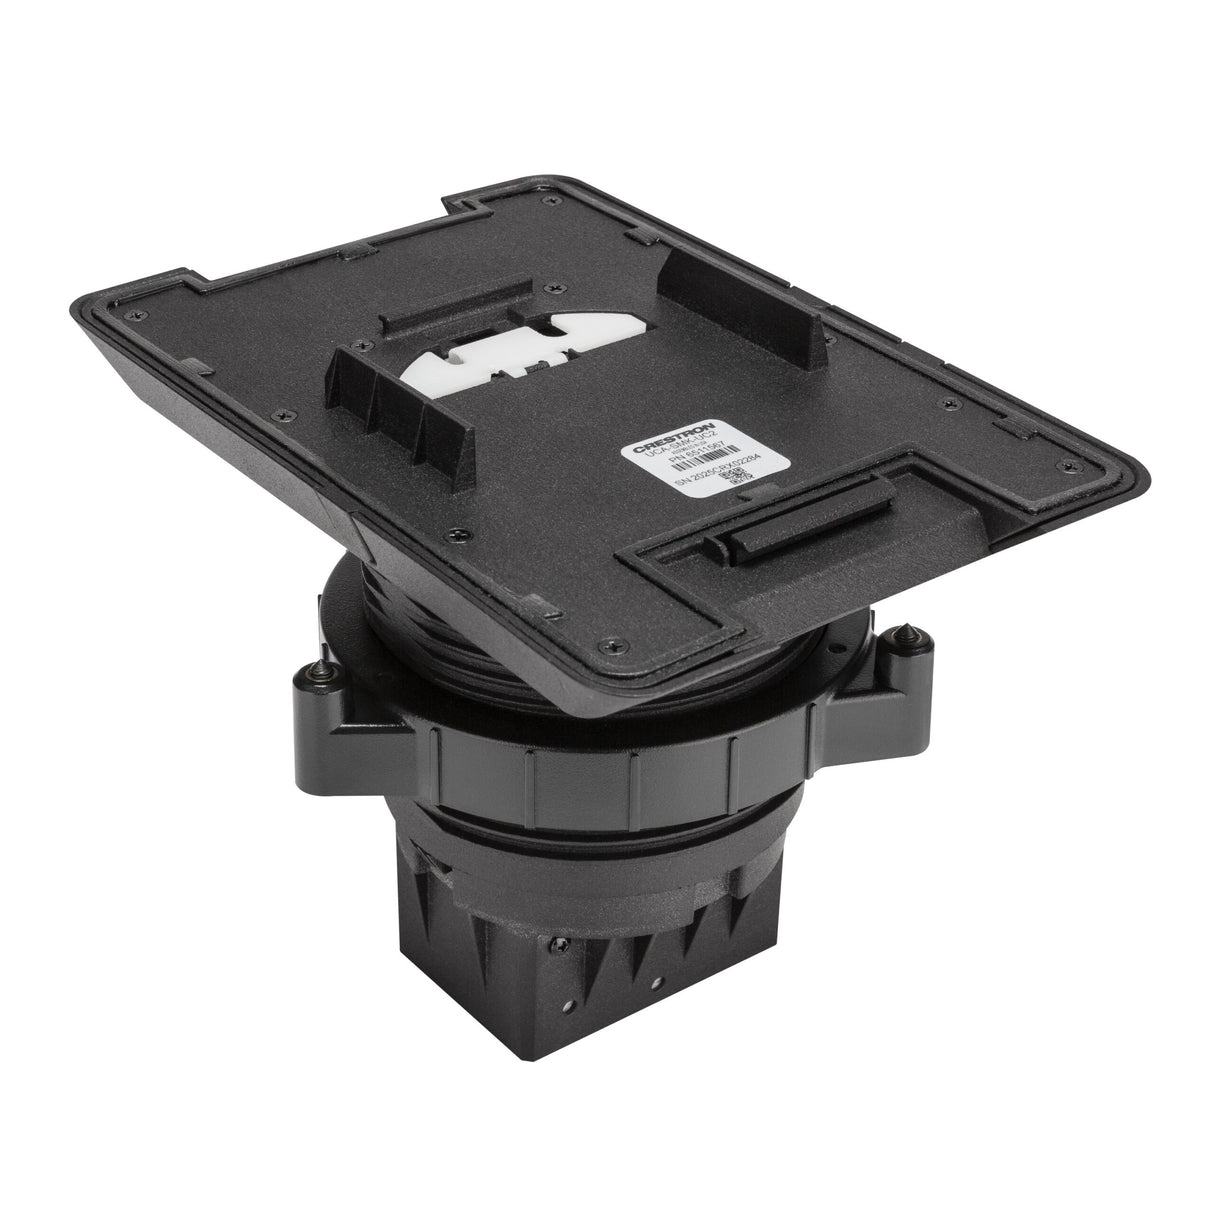 Crestron UCA-SMK-UC2 Swivel Mount for Flex Tabletop Small Room Conference System